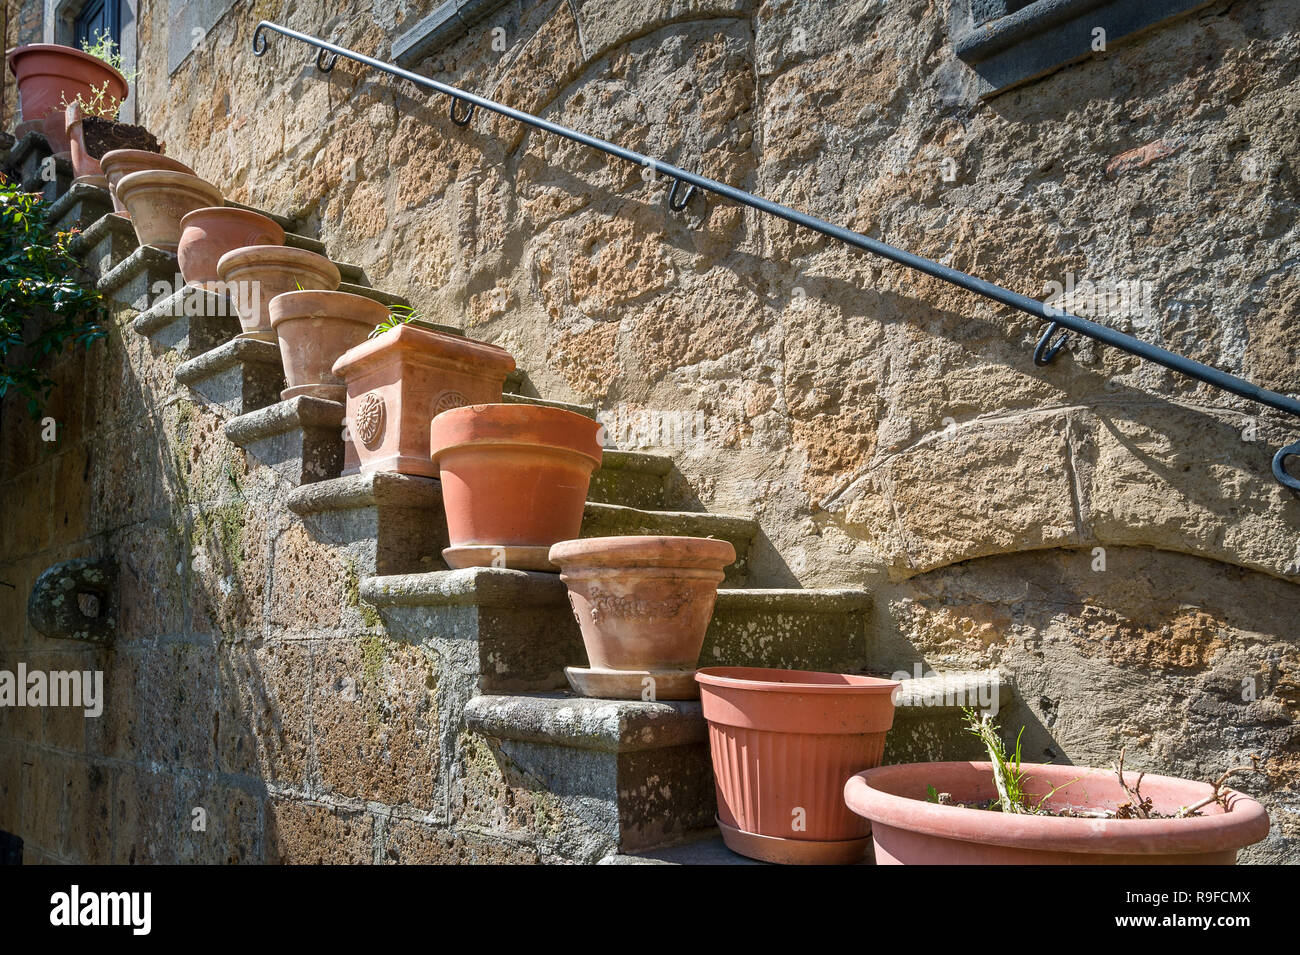 Flower pots at the steps of Civita di Bagnoregio old house. Tuscany, Italy. Stock Photo